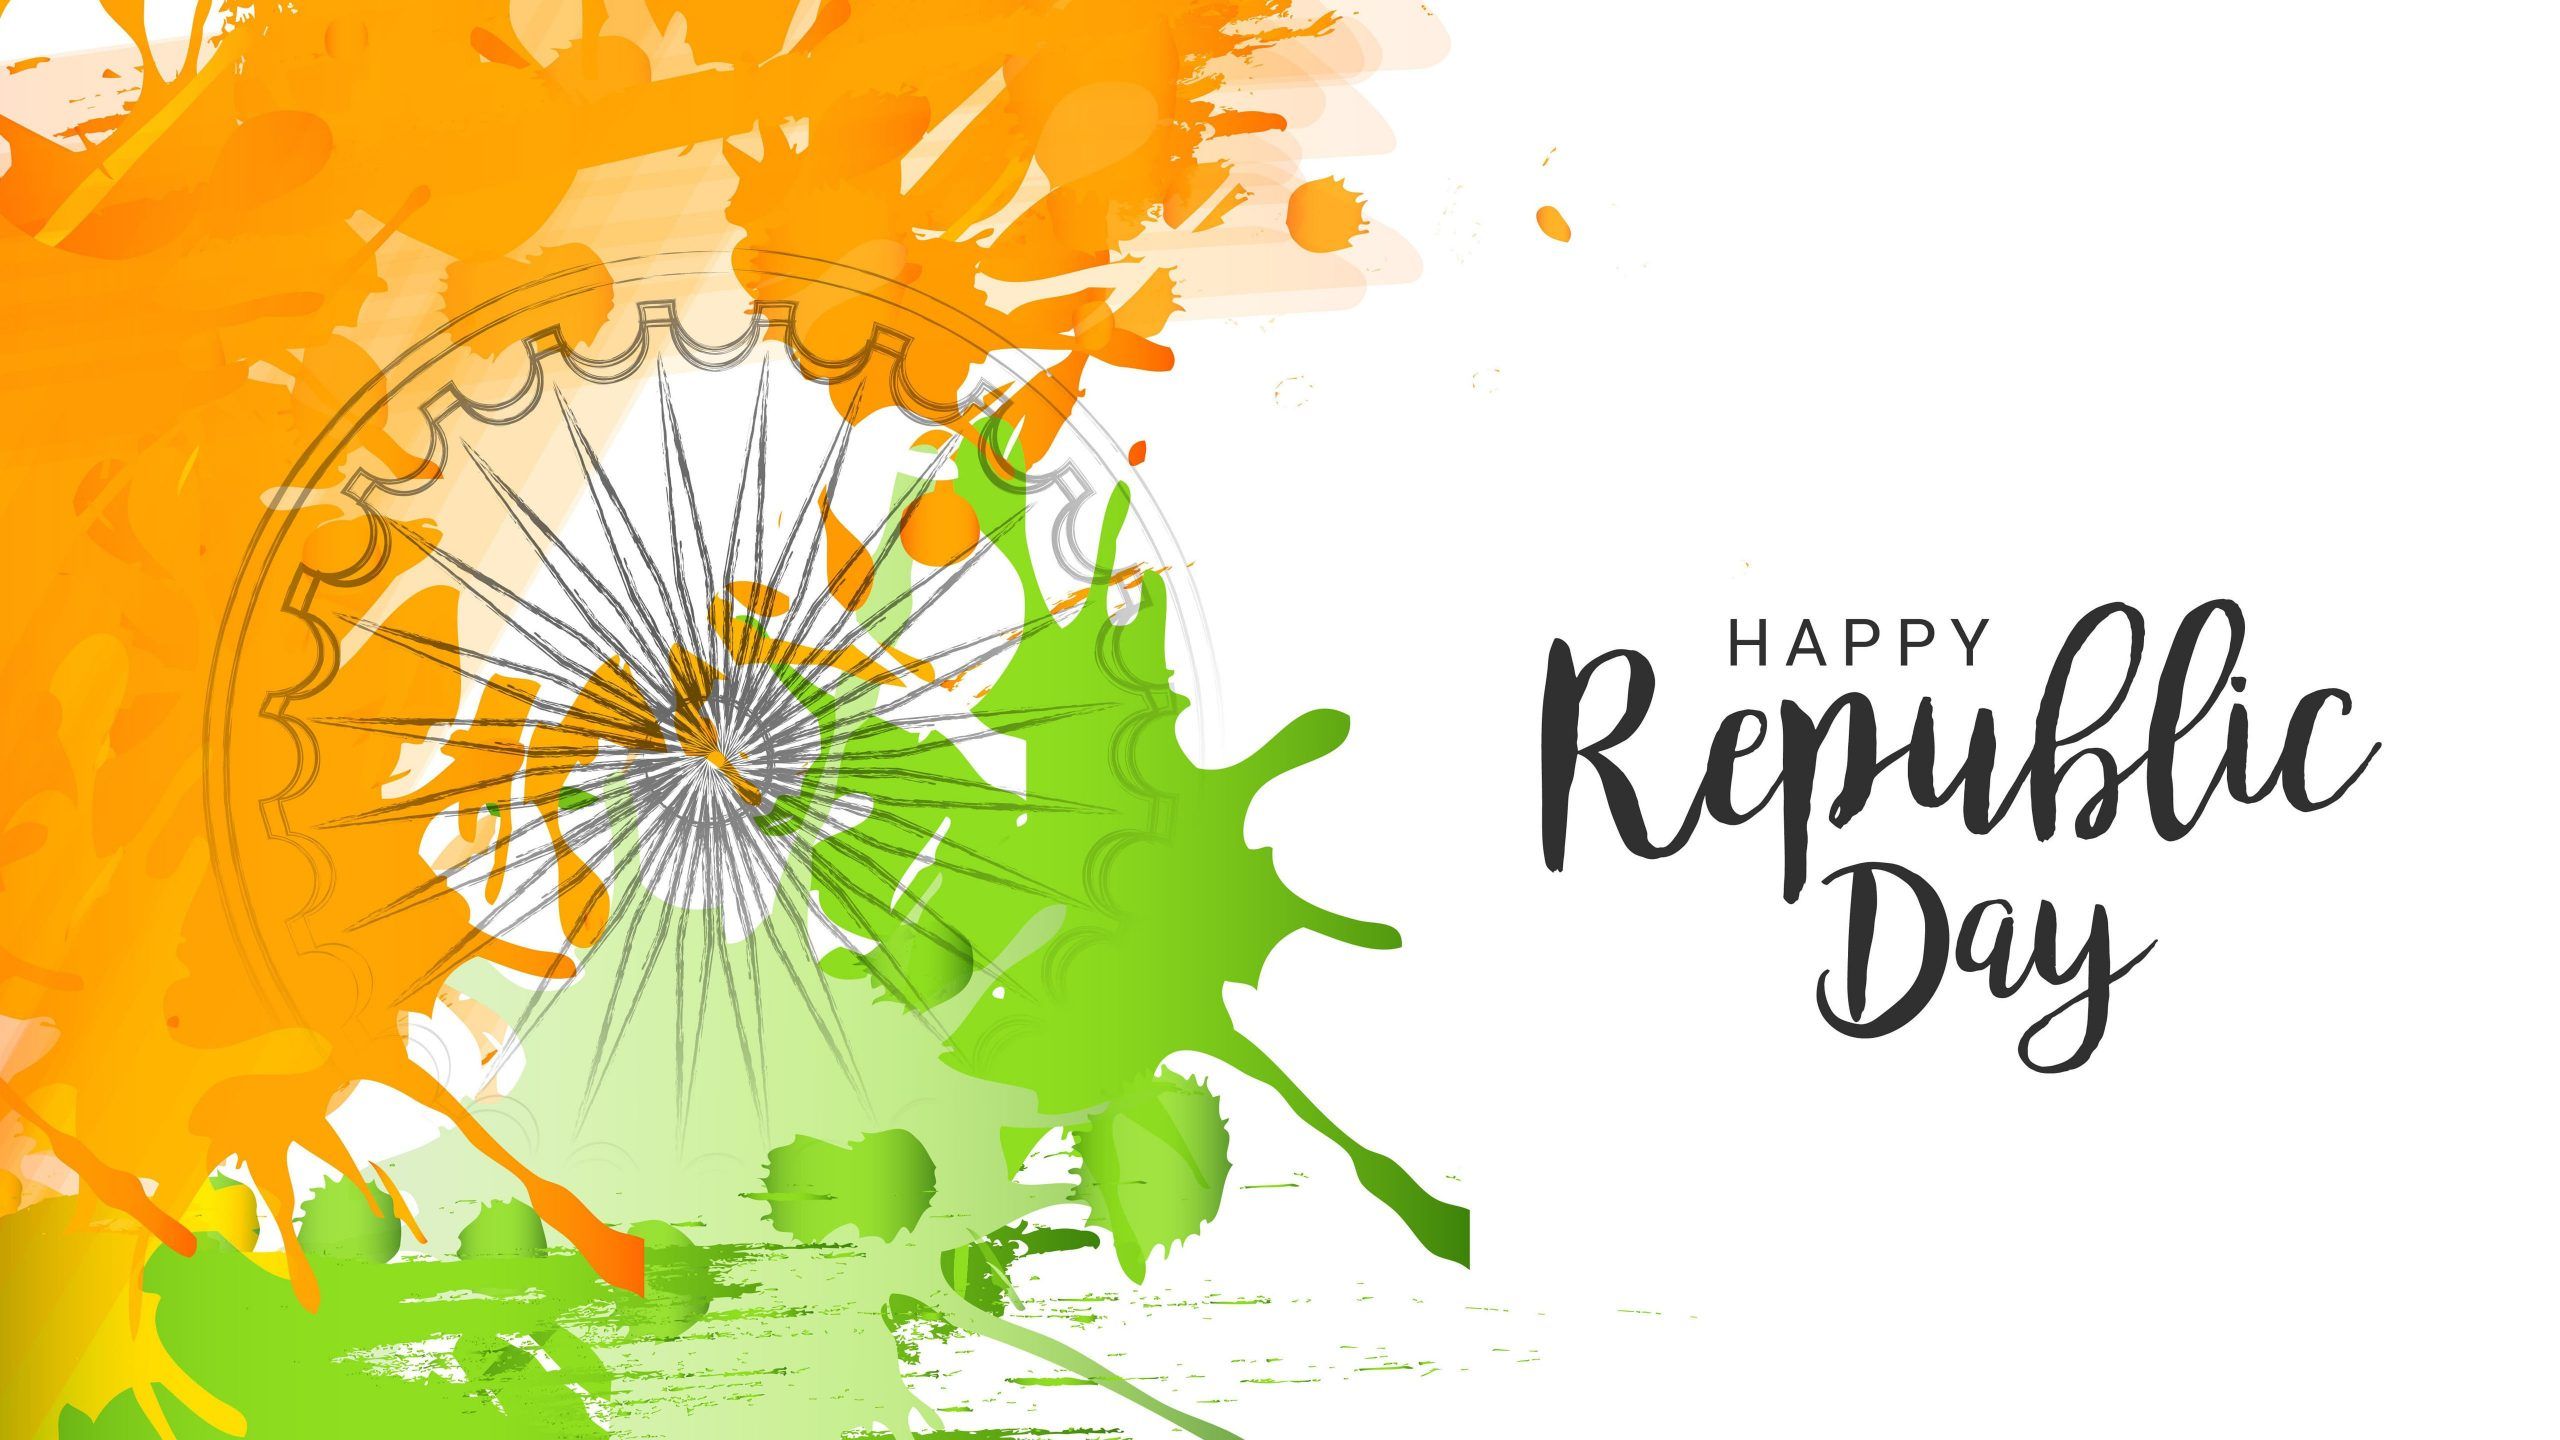 Best Happy Republic Day Image 26 January Speeches, Poems, Messages for Everyone